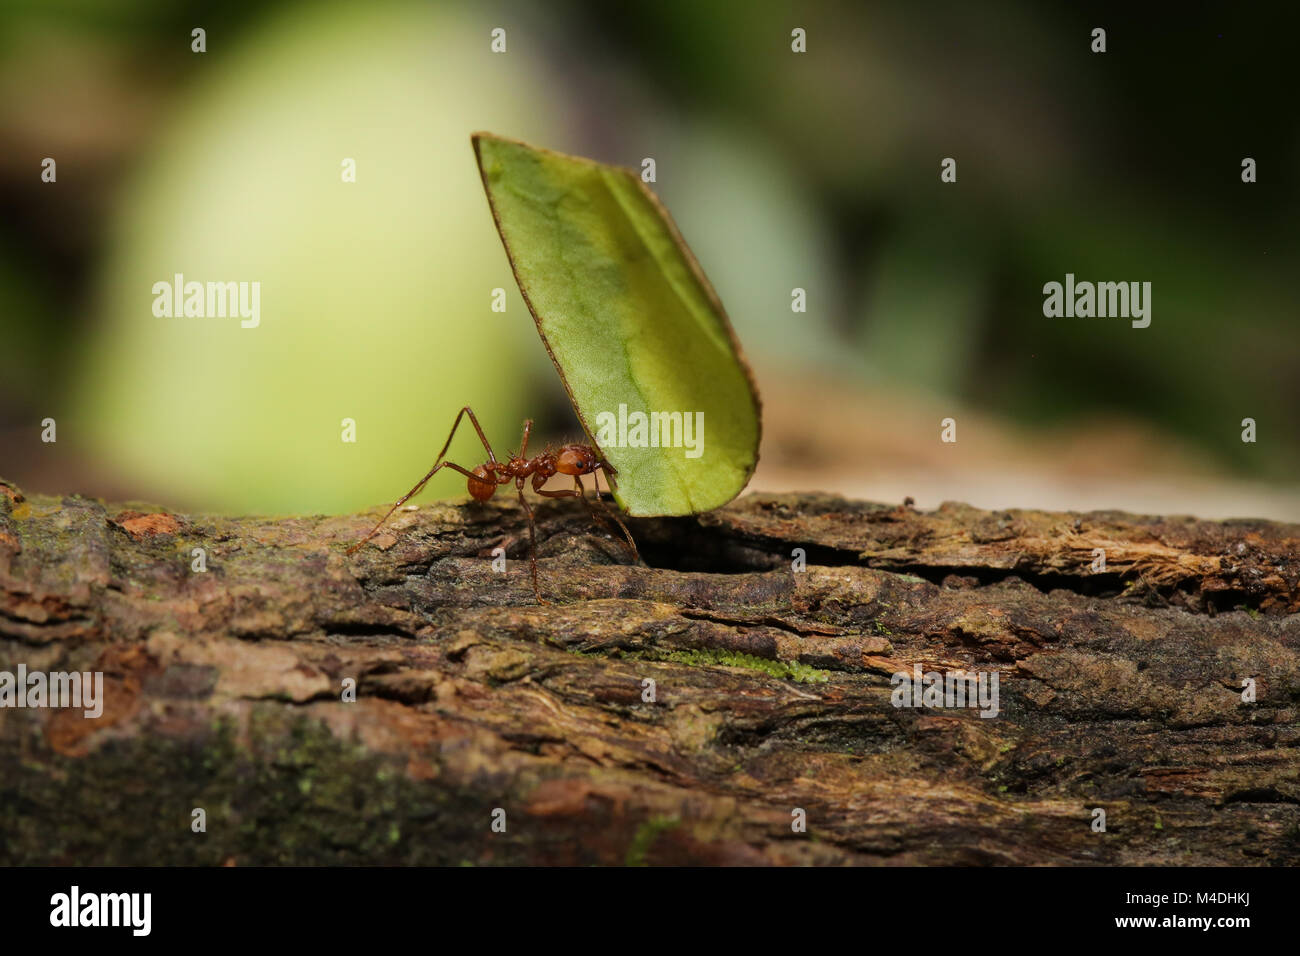 Leafcutter ant in the jungle, Costa Rica Stock Photo